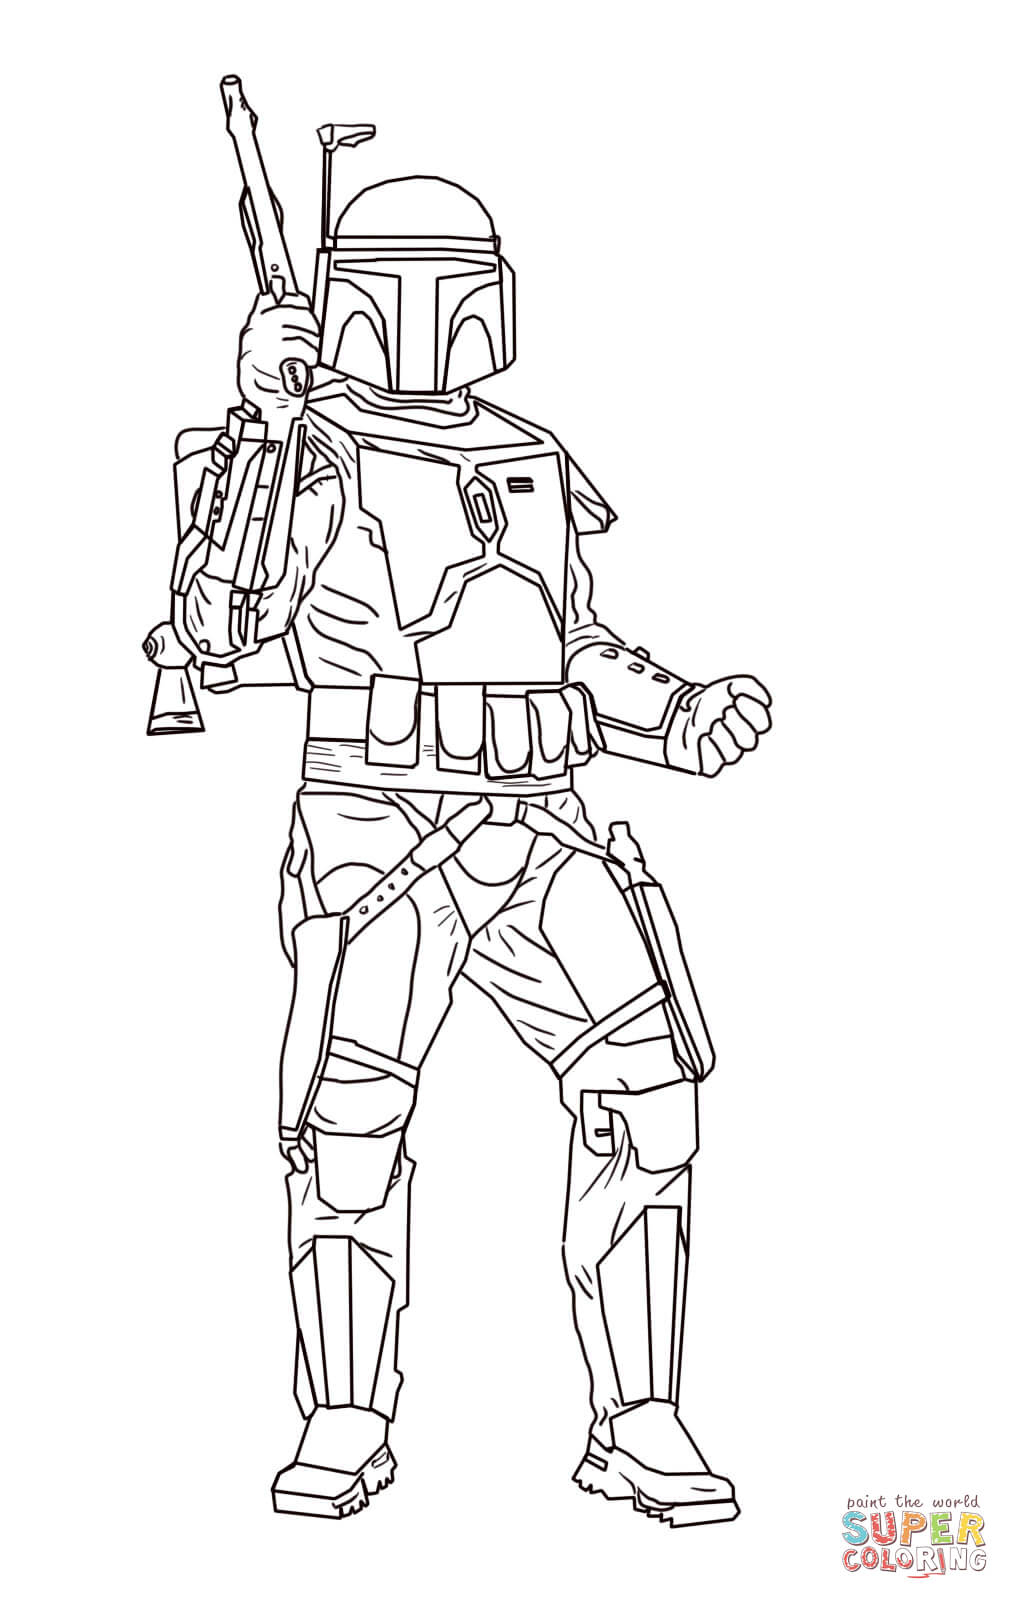 Boba Fett Coloring Page Jango Fett Coloring Page Free Printable Coloring Pages